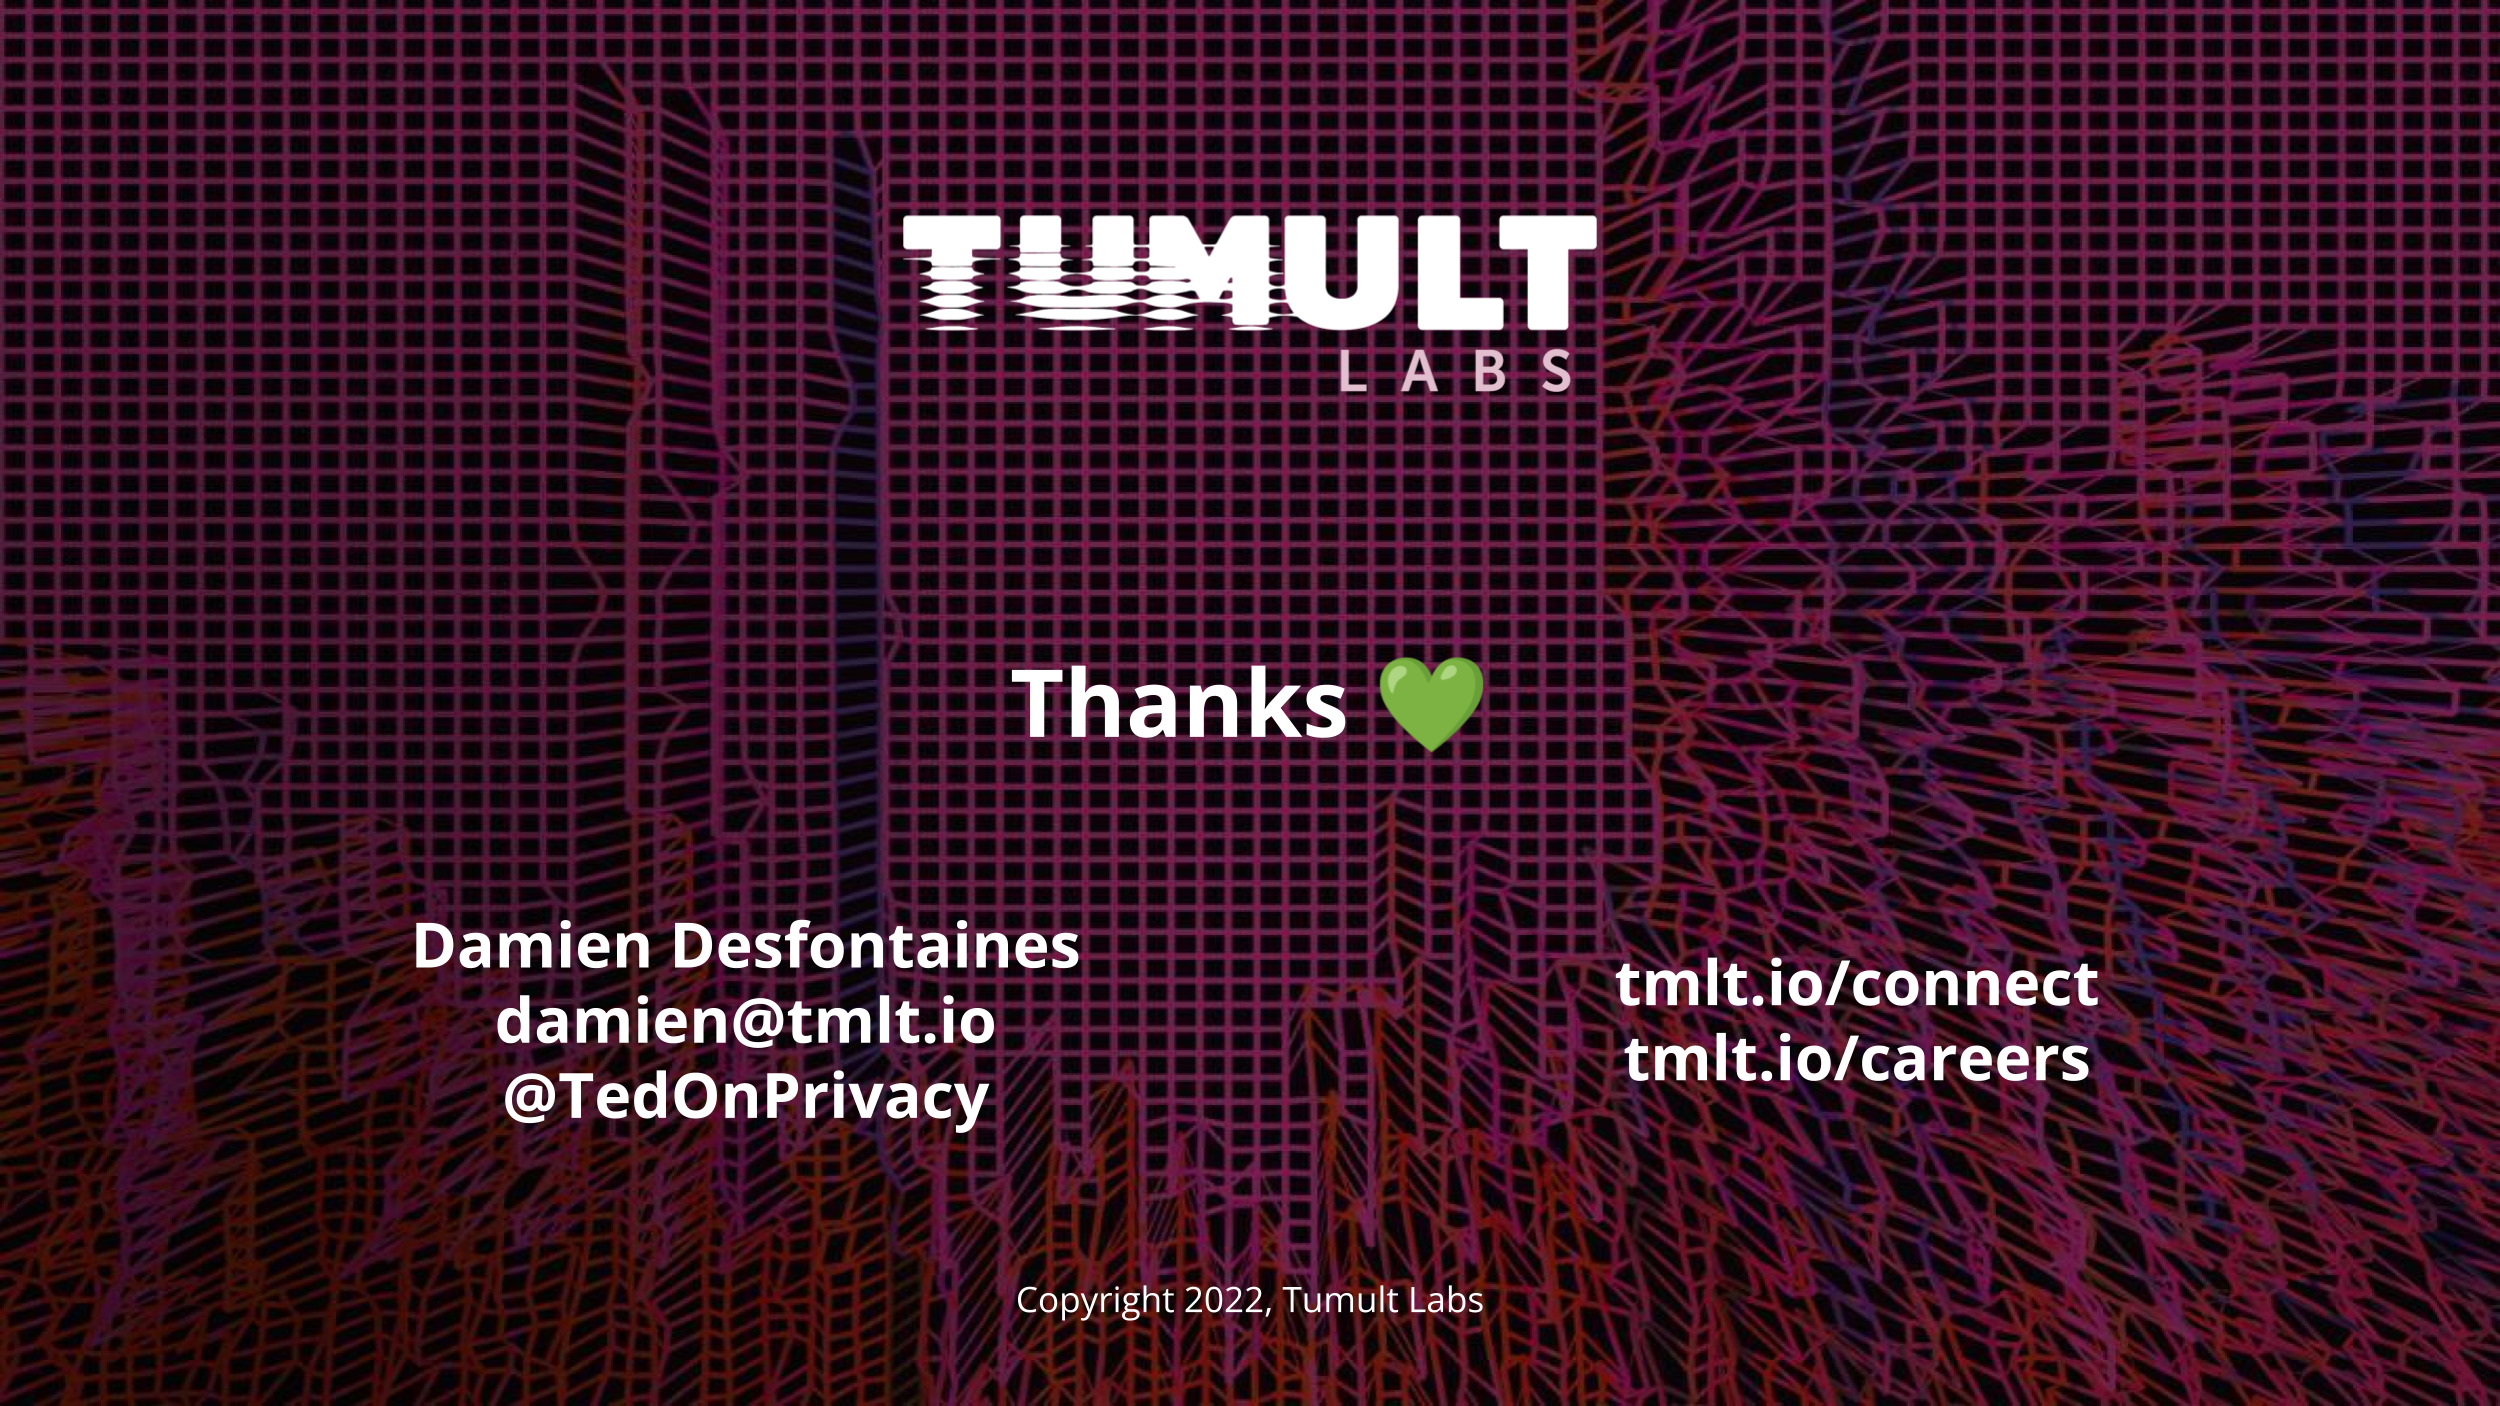 An outro slide, saying "Thanks ♥", giving displaying author information, the
Tumult Labs logo, and the two links from the previous
slide.